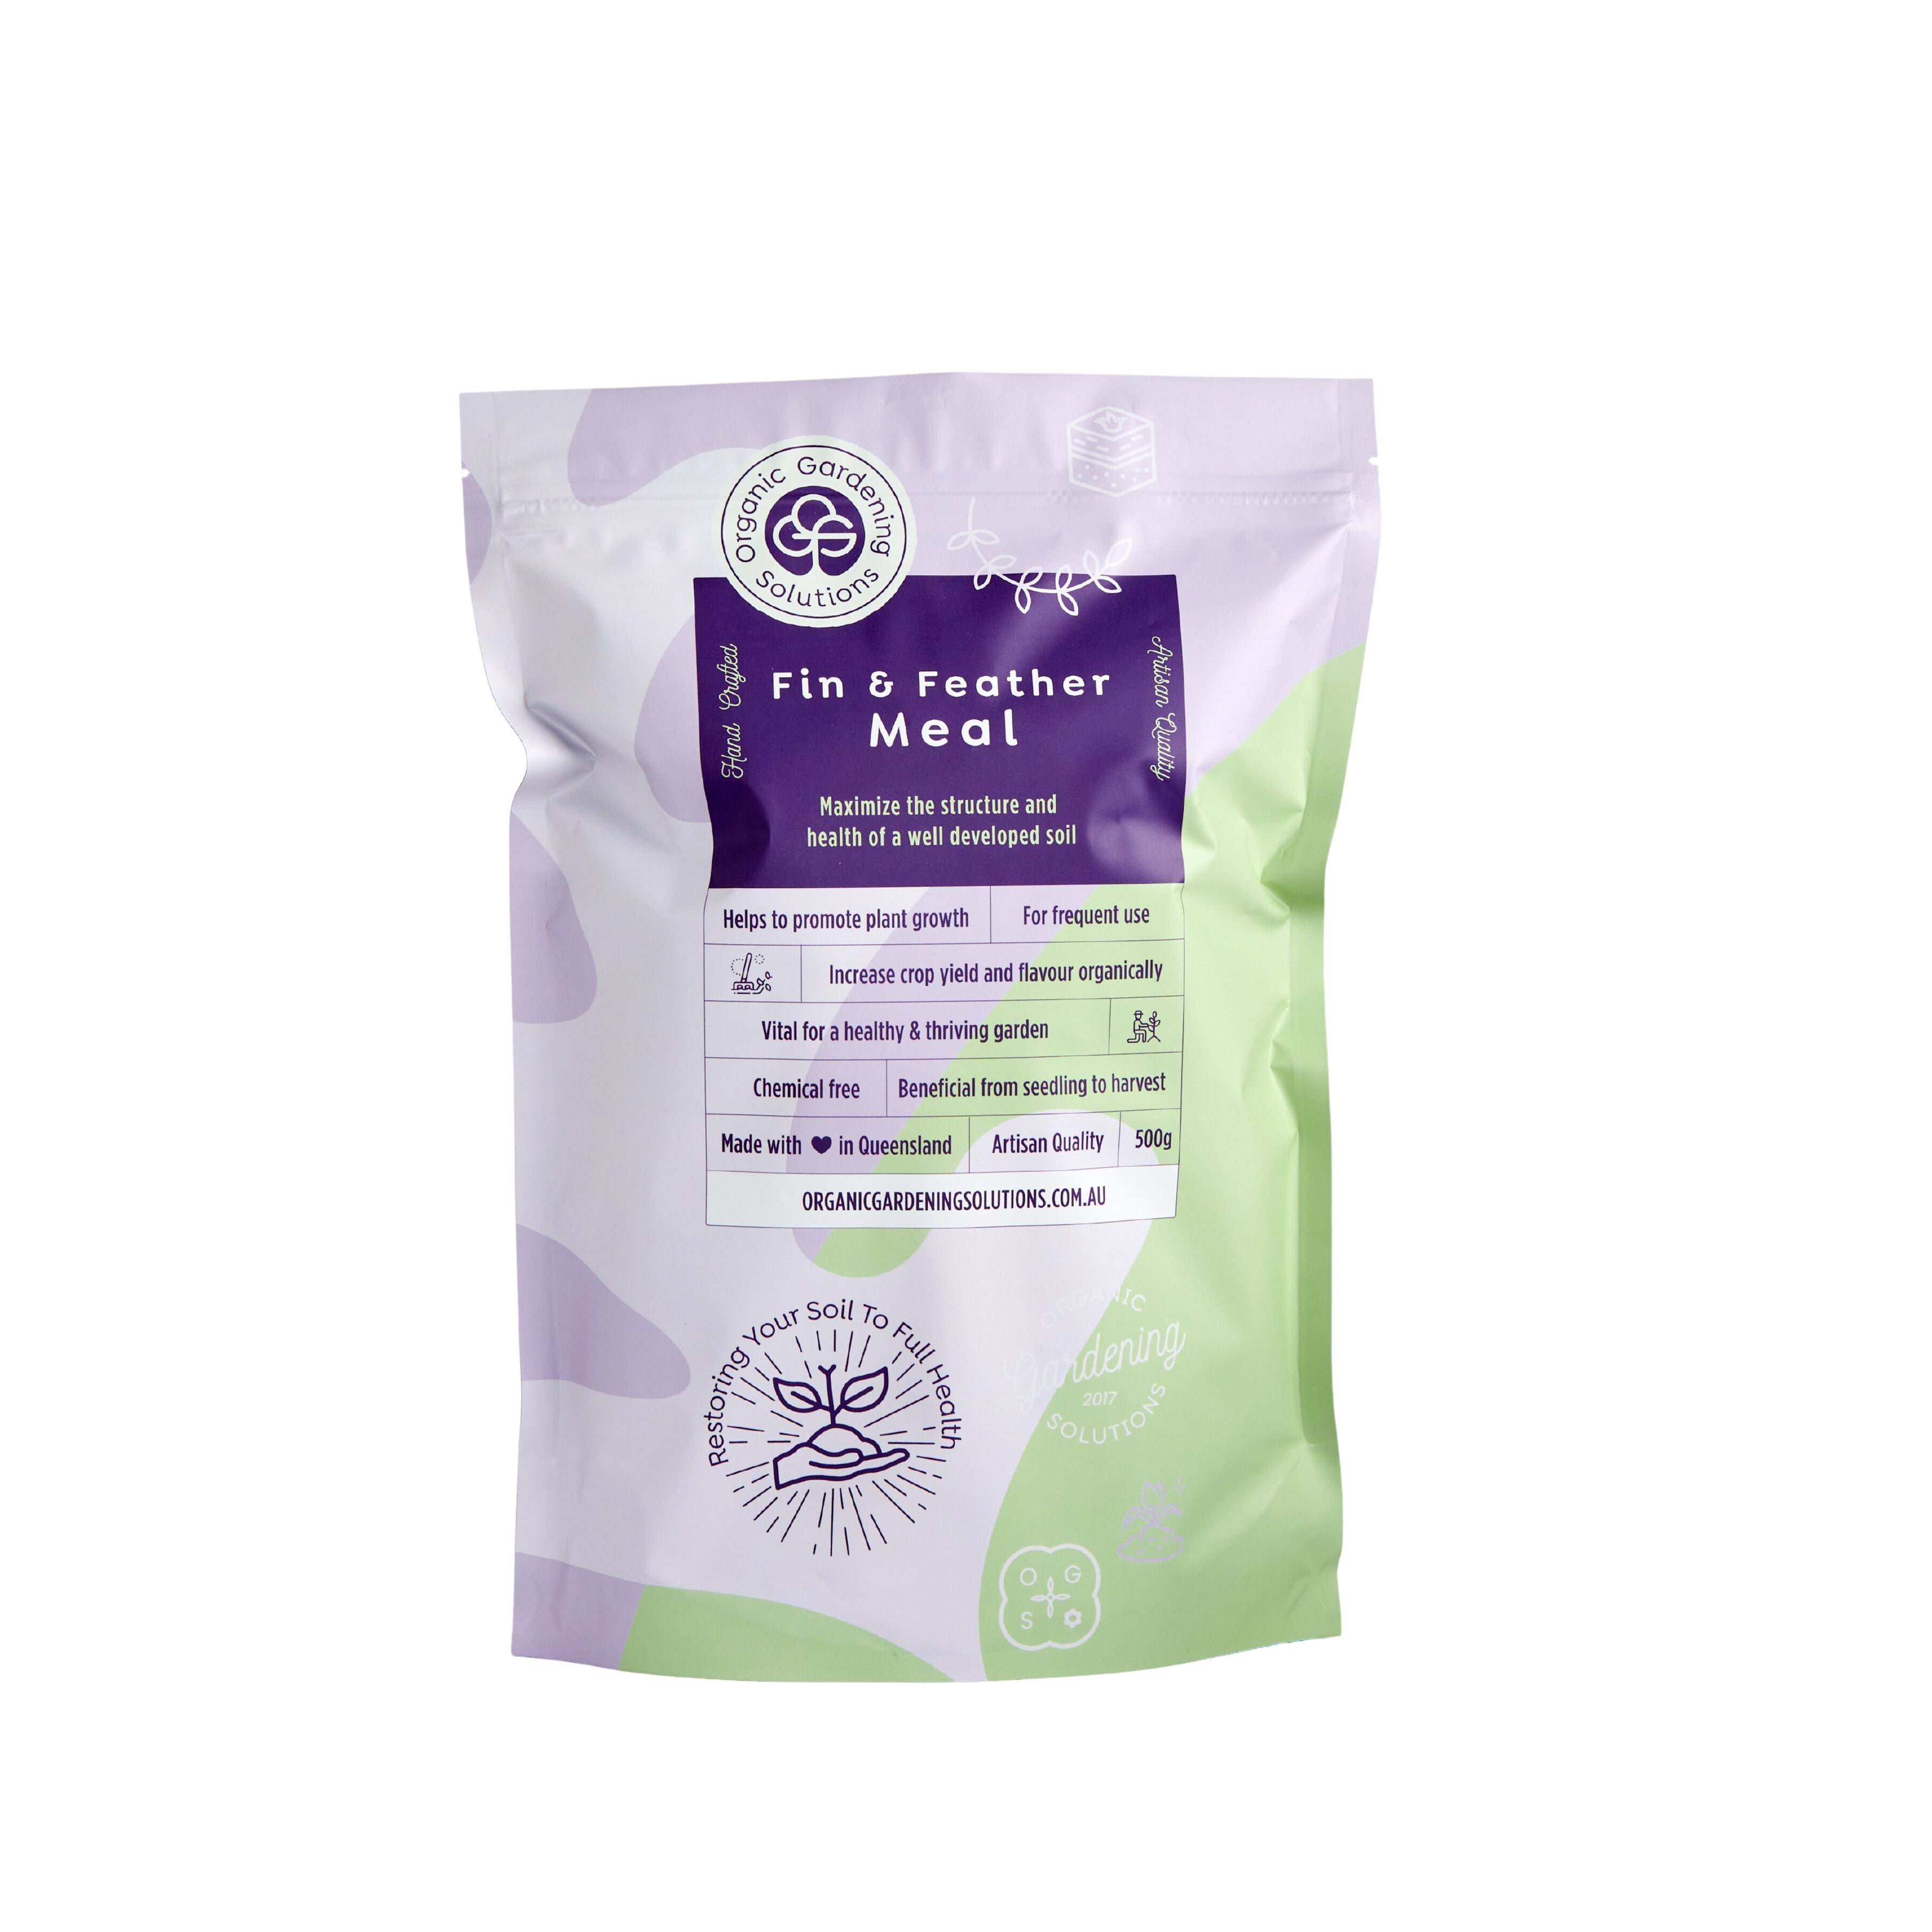 Organic Gardening Solutions Fin & Feather Meal